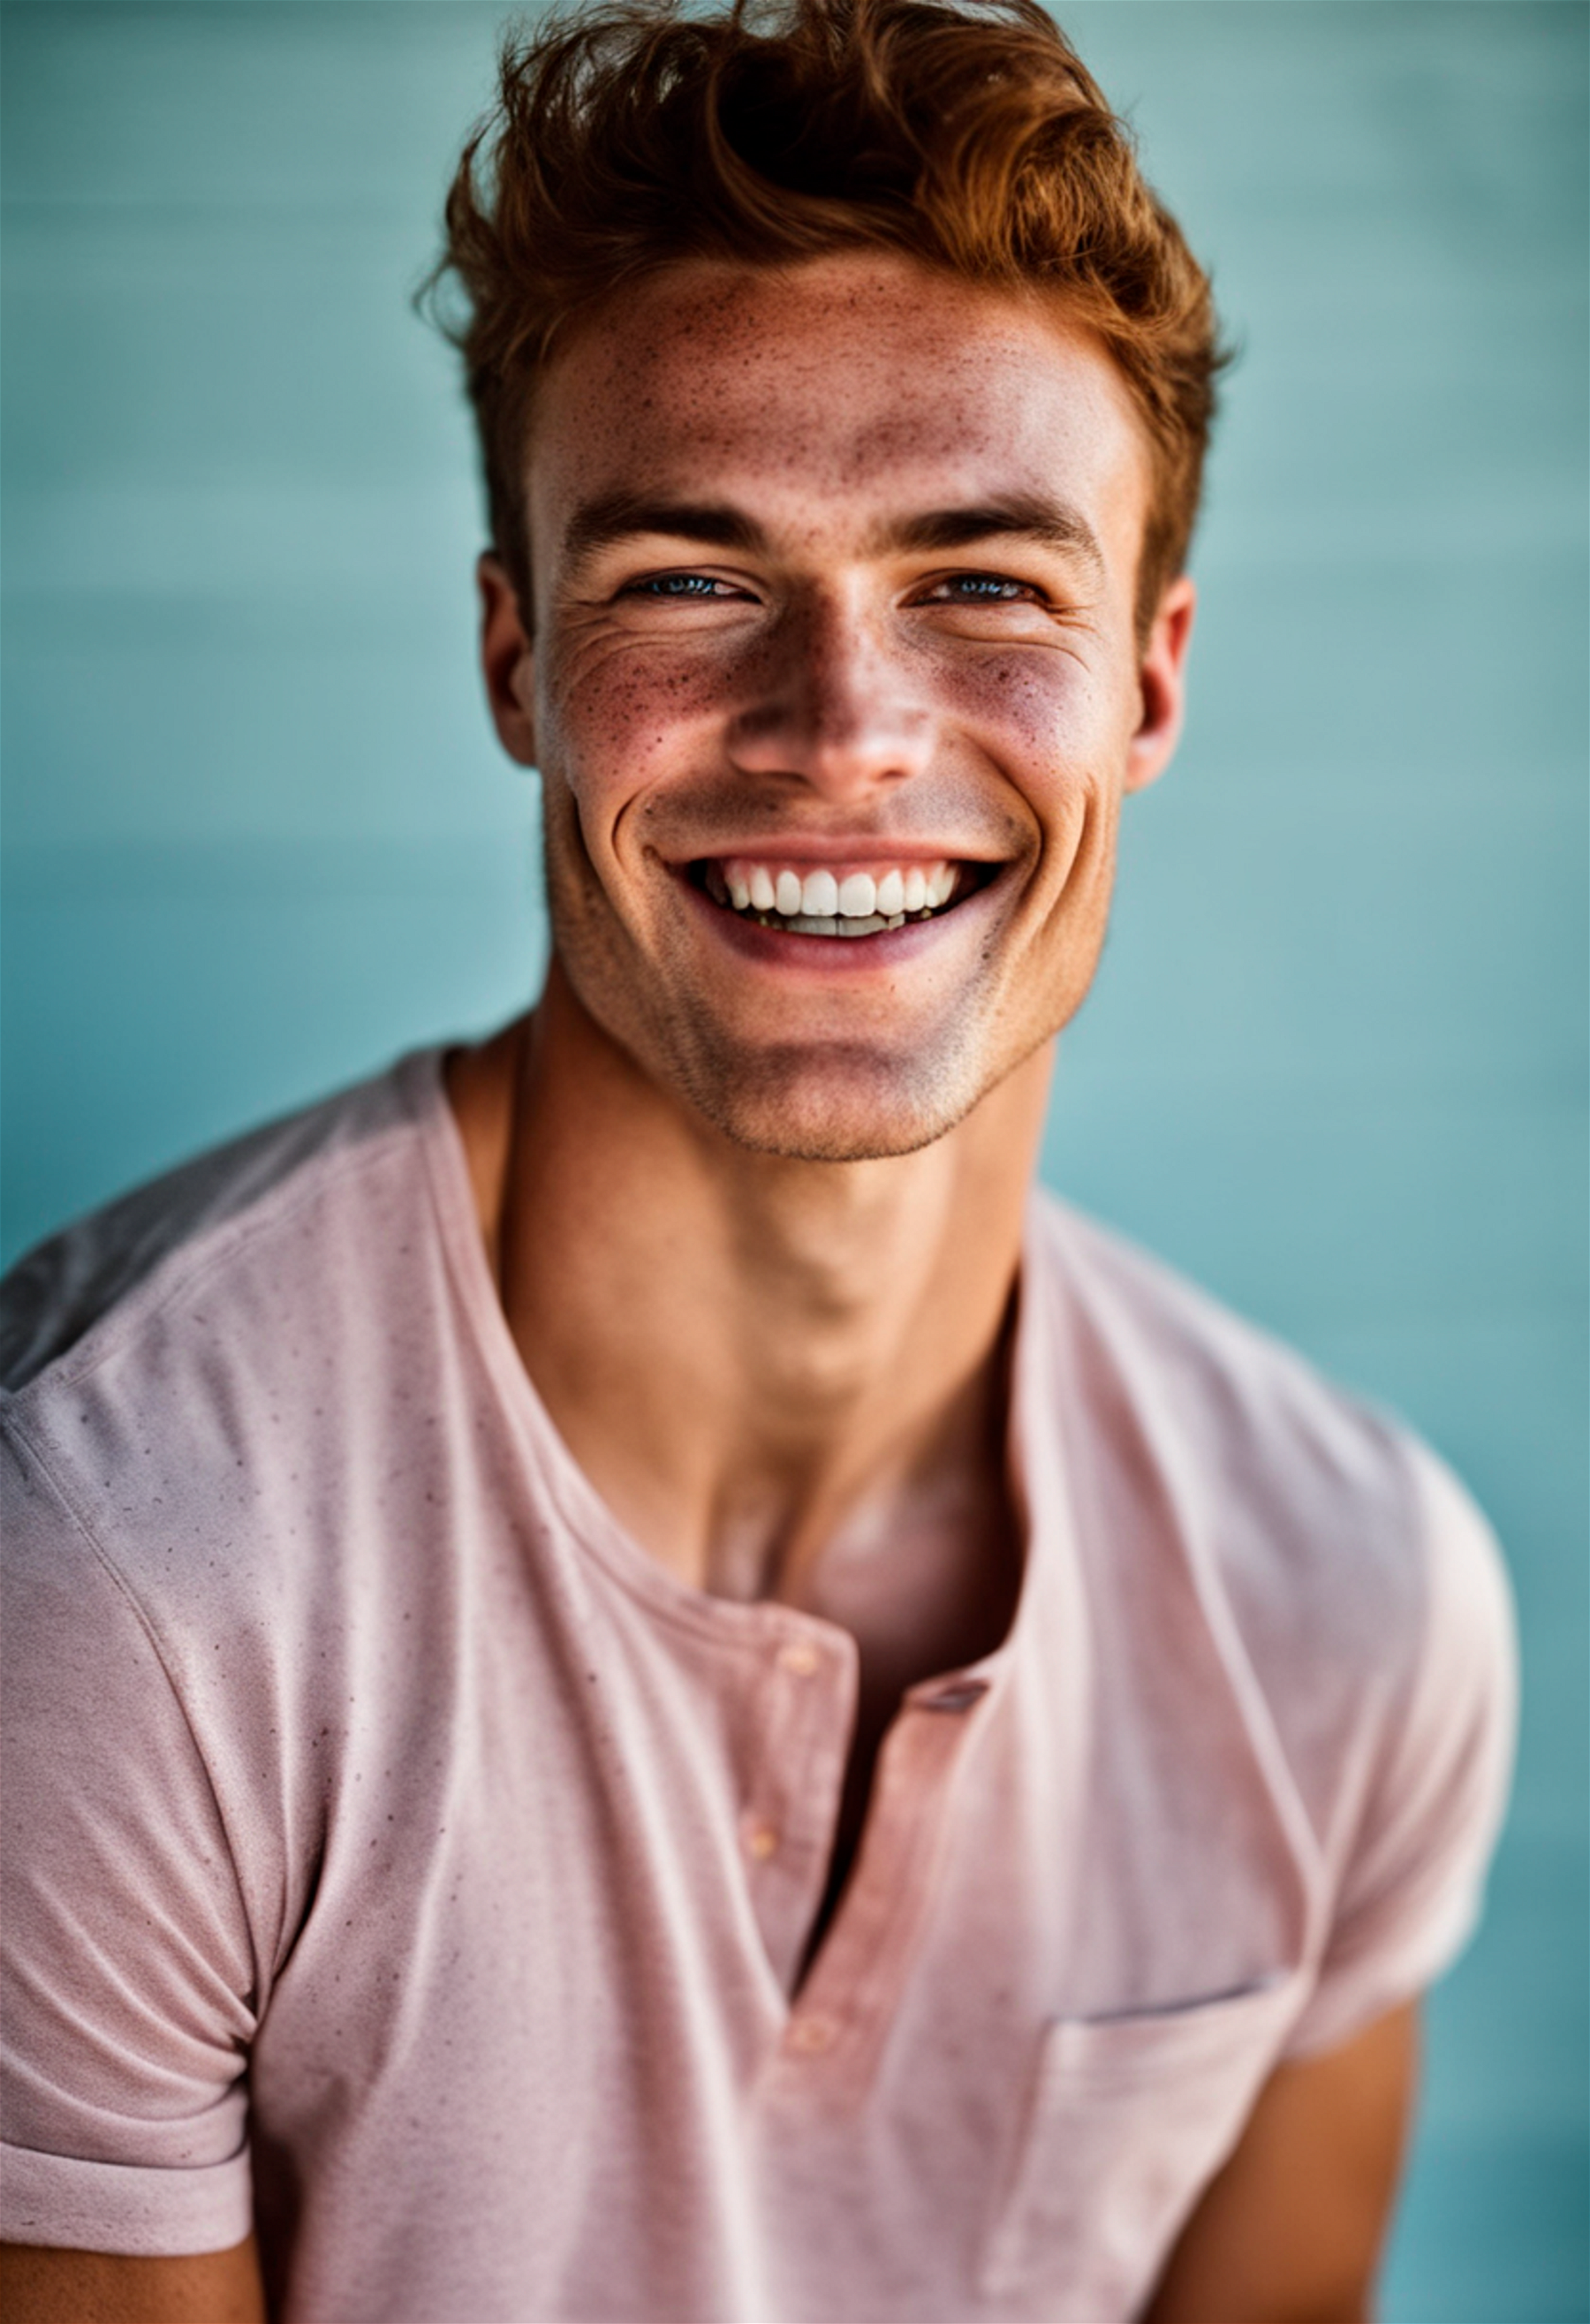 photo of beautiful man smiling, freckles, looking away, shot with Nikon D750, soft light and pastel colors, magazine cover